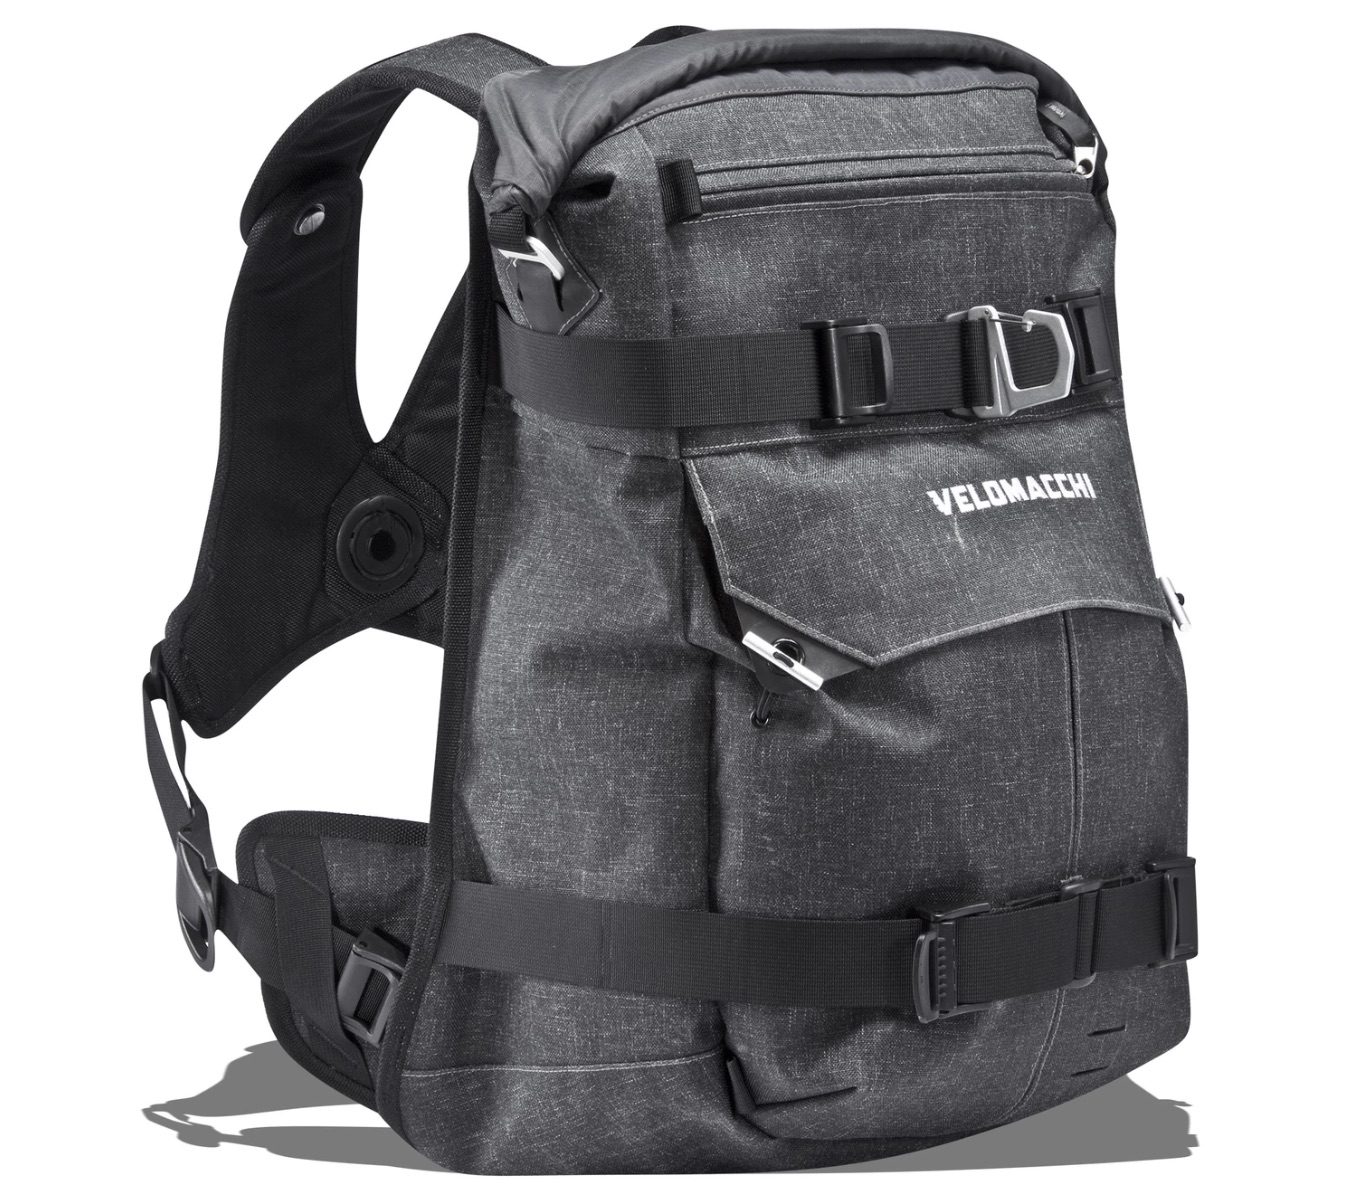 Velomacchi 40L Roll-Top Backpack